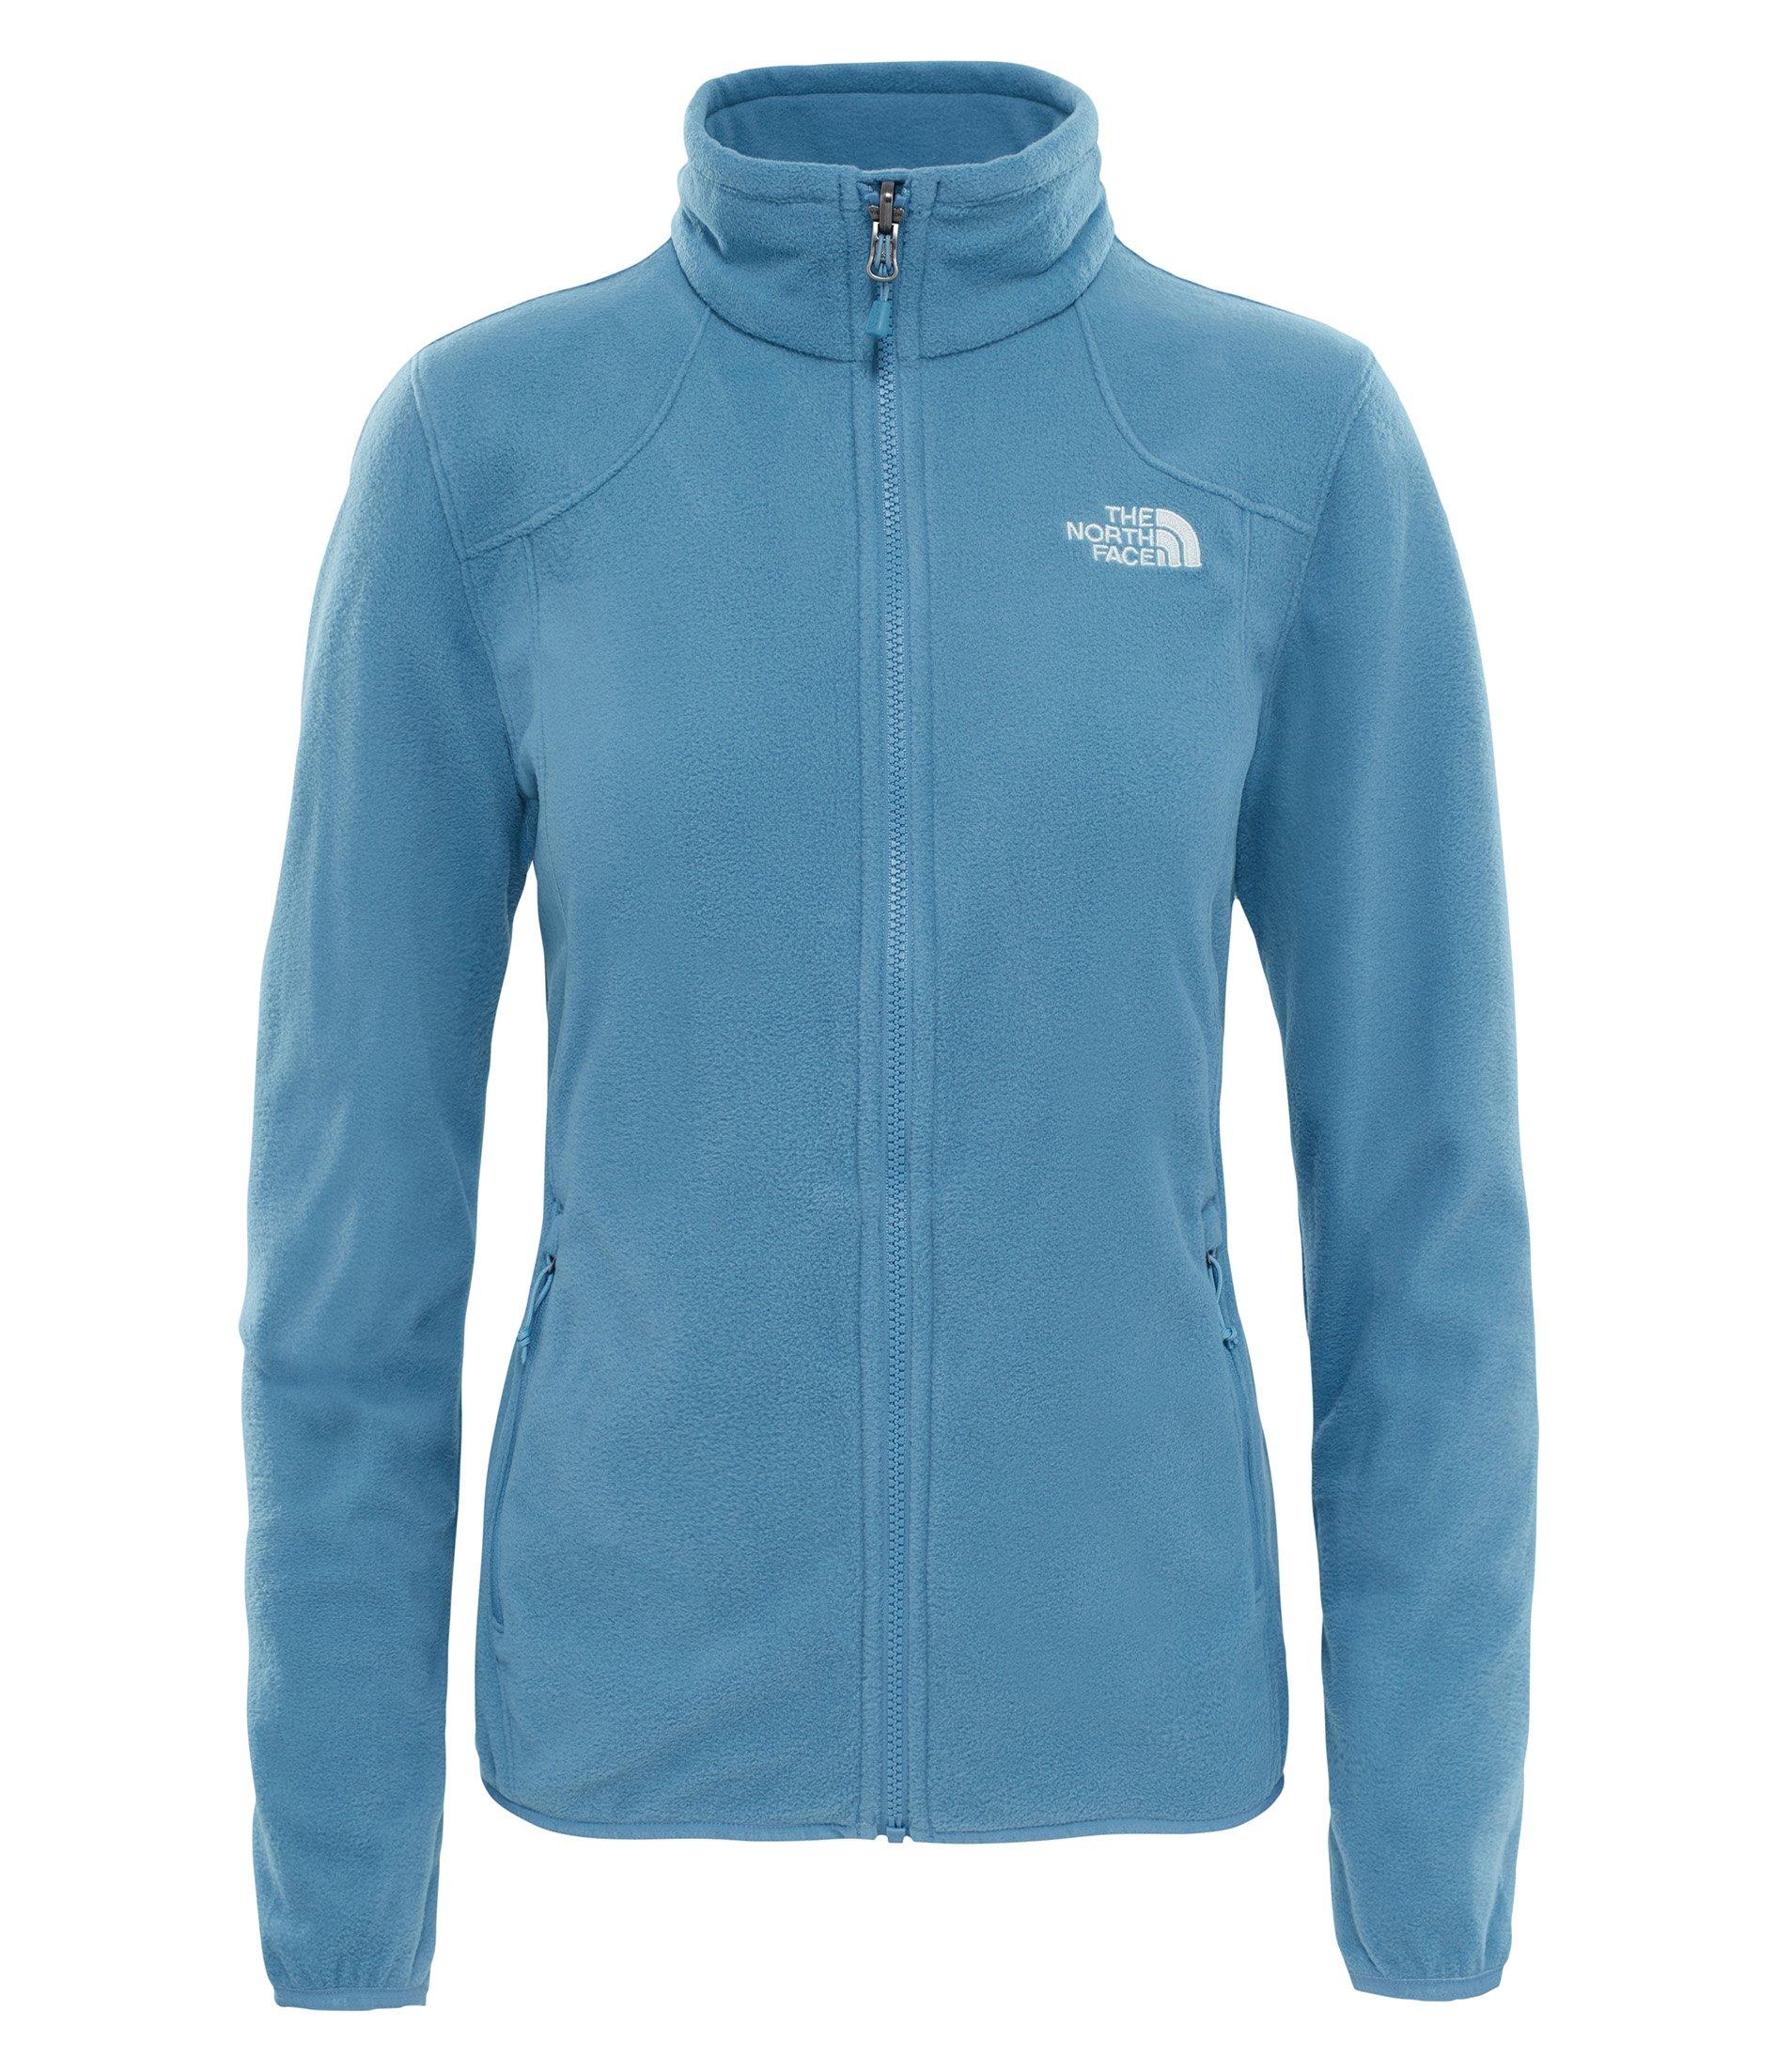 The North Face Women's Evolution II Triclimate Jacket - Blue